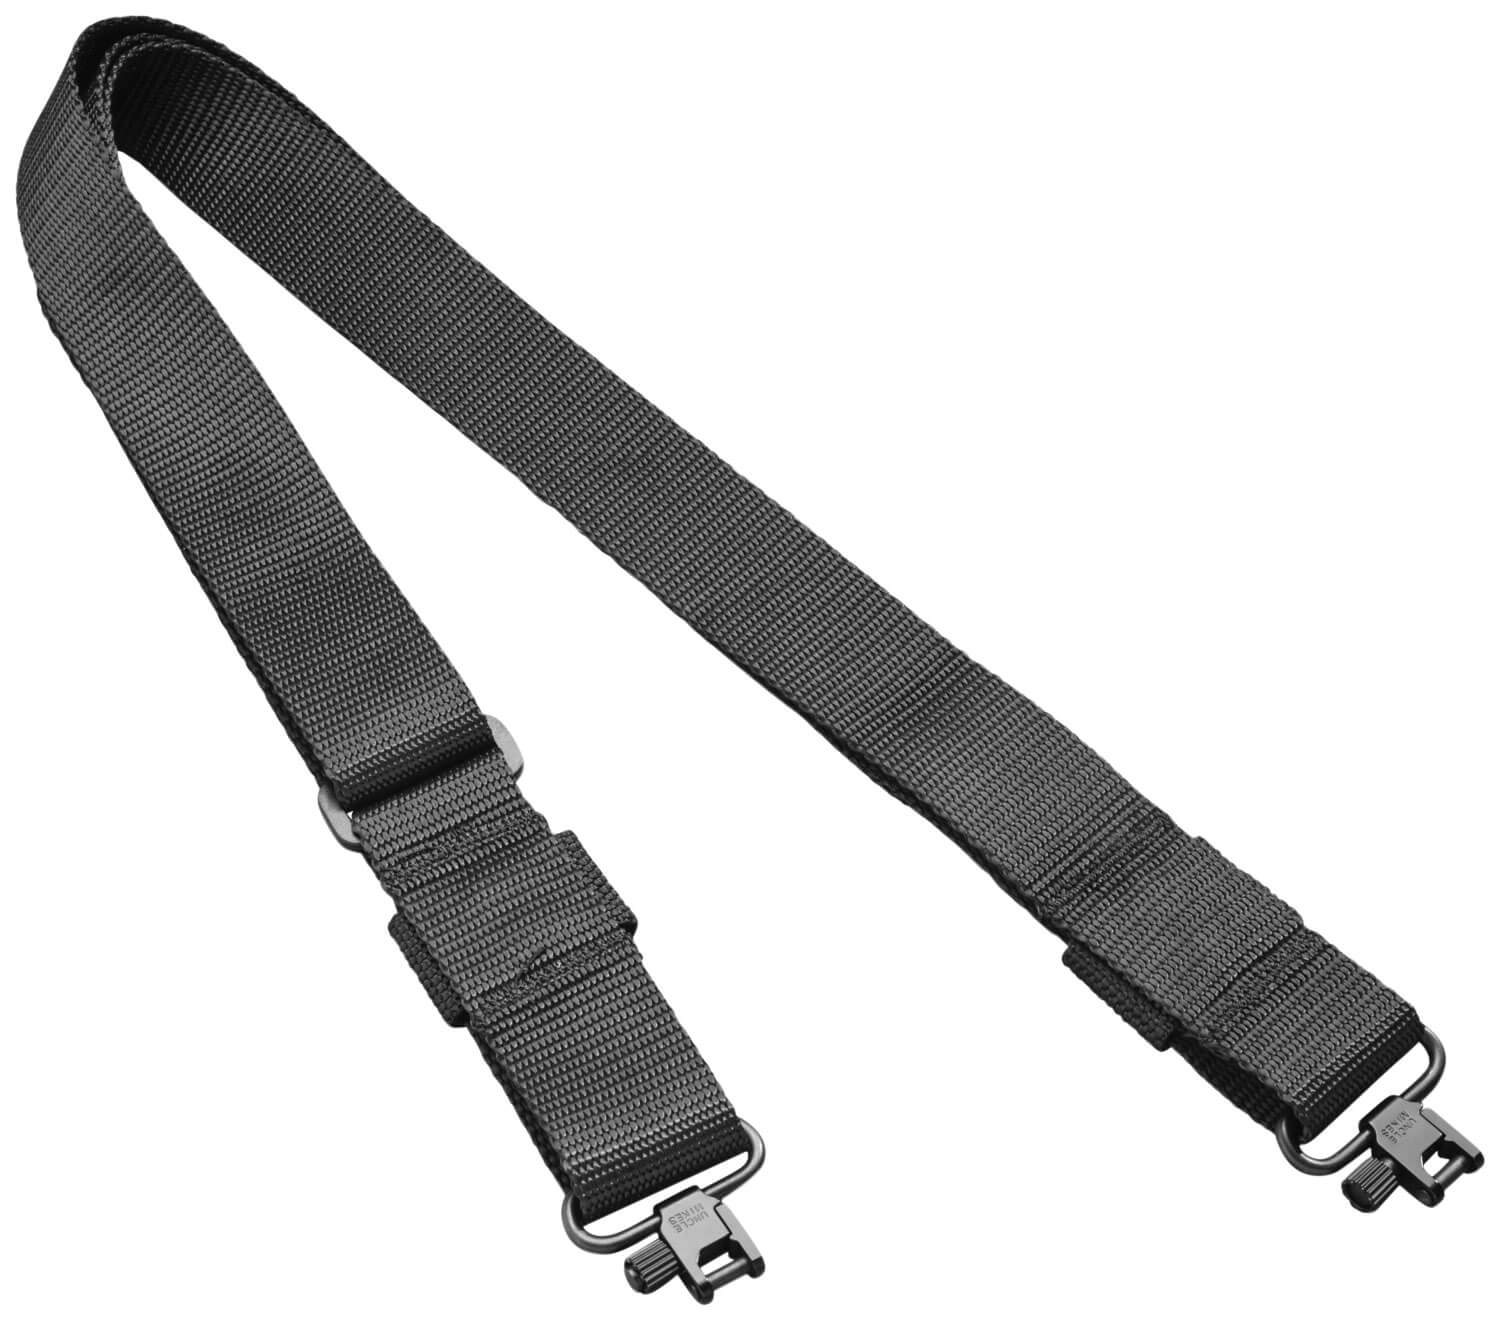 Butler Creek 80091 Quick Carry Sling made of Black Nylon Webbing with ...